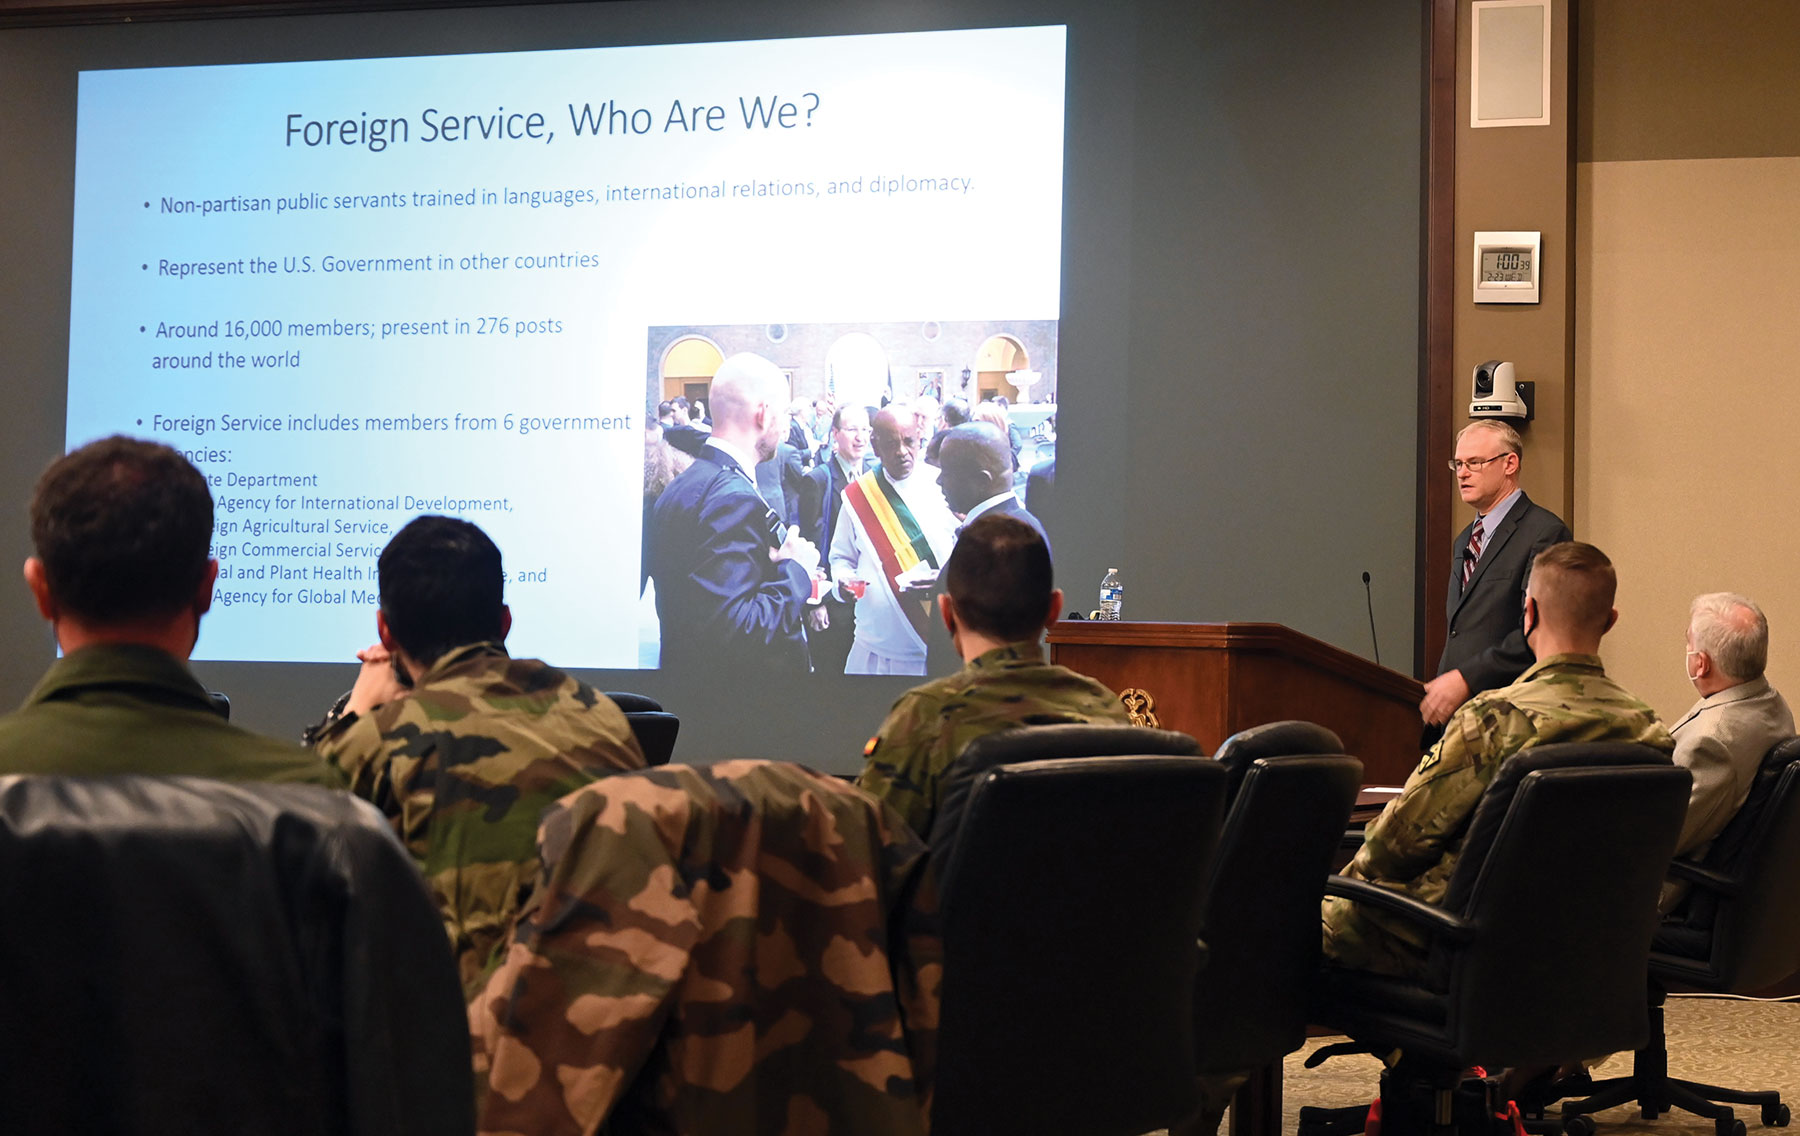 Terry D. Mobley, Diplomacy Chair, U.S. Army Command and General Staff College, leads the discussion about the U.S. Department of State and Foreign Service Officers during the InterAgency Brown-Bag Lecture on Feb, 23, 2022, in the Marshall Auditorium of the Lewis and Clark Center on Fort Leavenworth.